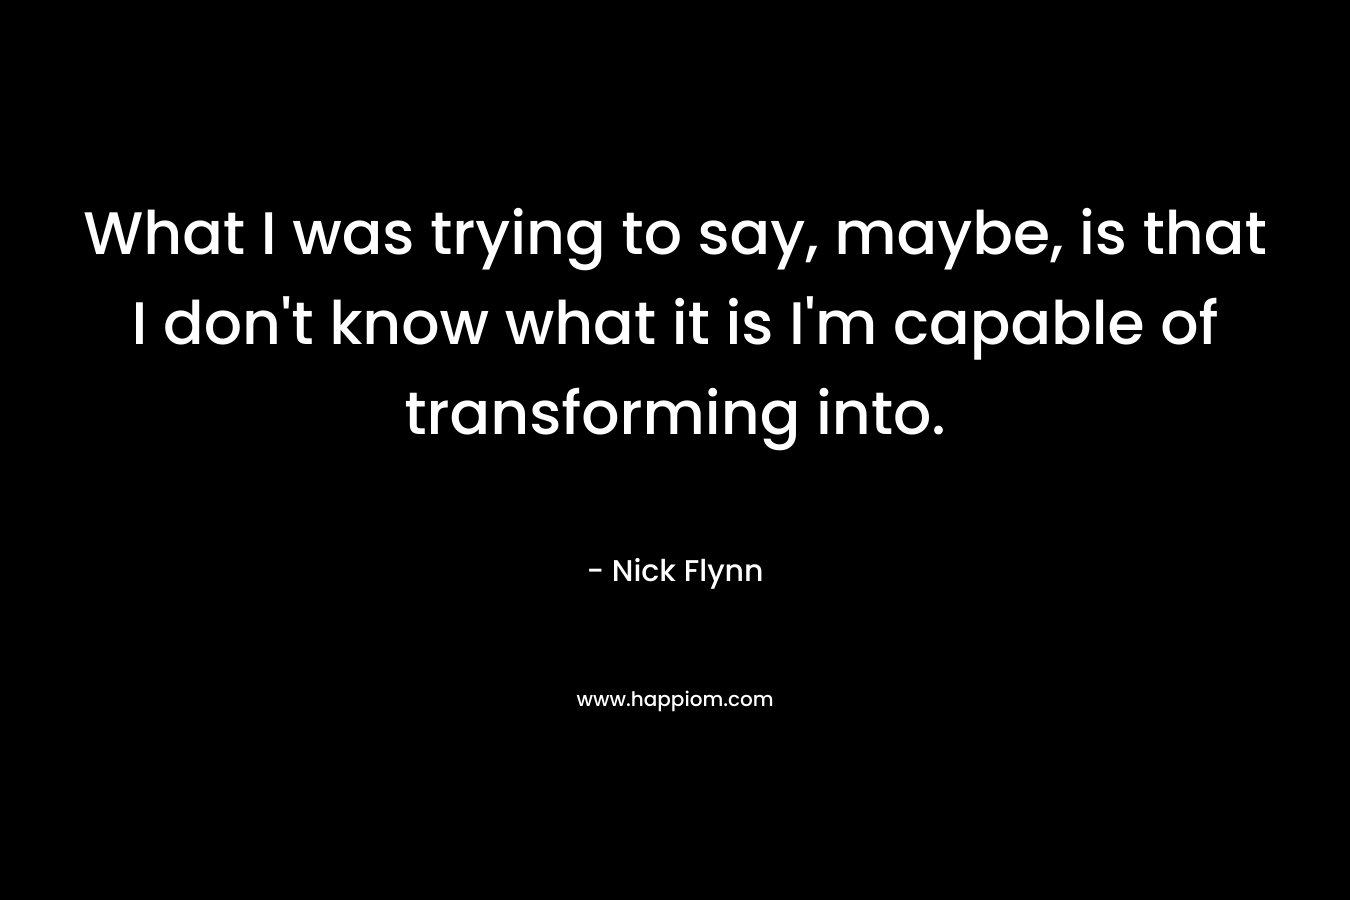 What I was trying to say, maybe, is that I don’t know what it is I’m capable of transforming into. – Nick Flynn